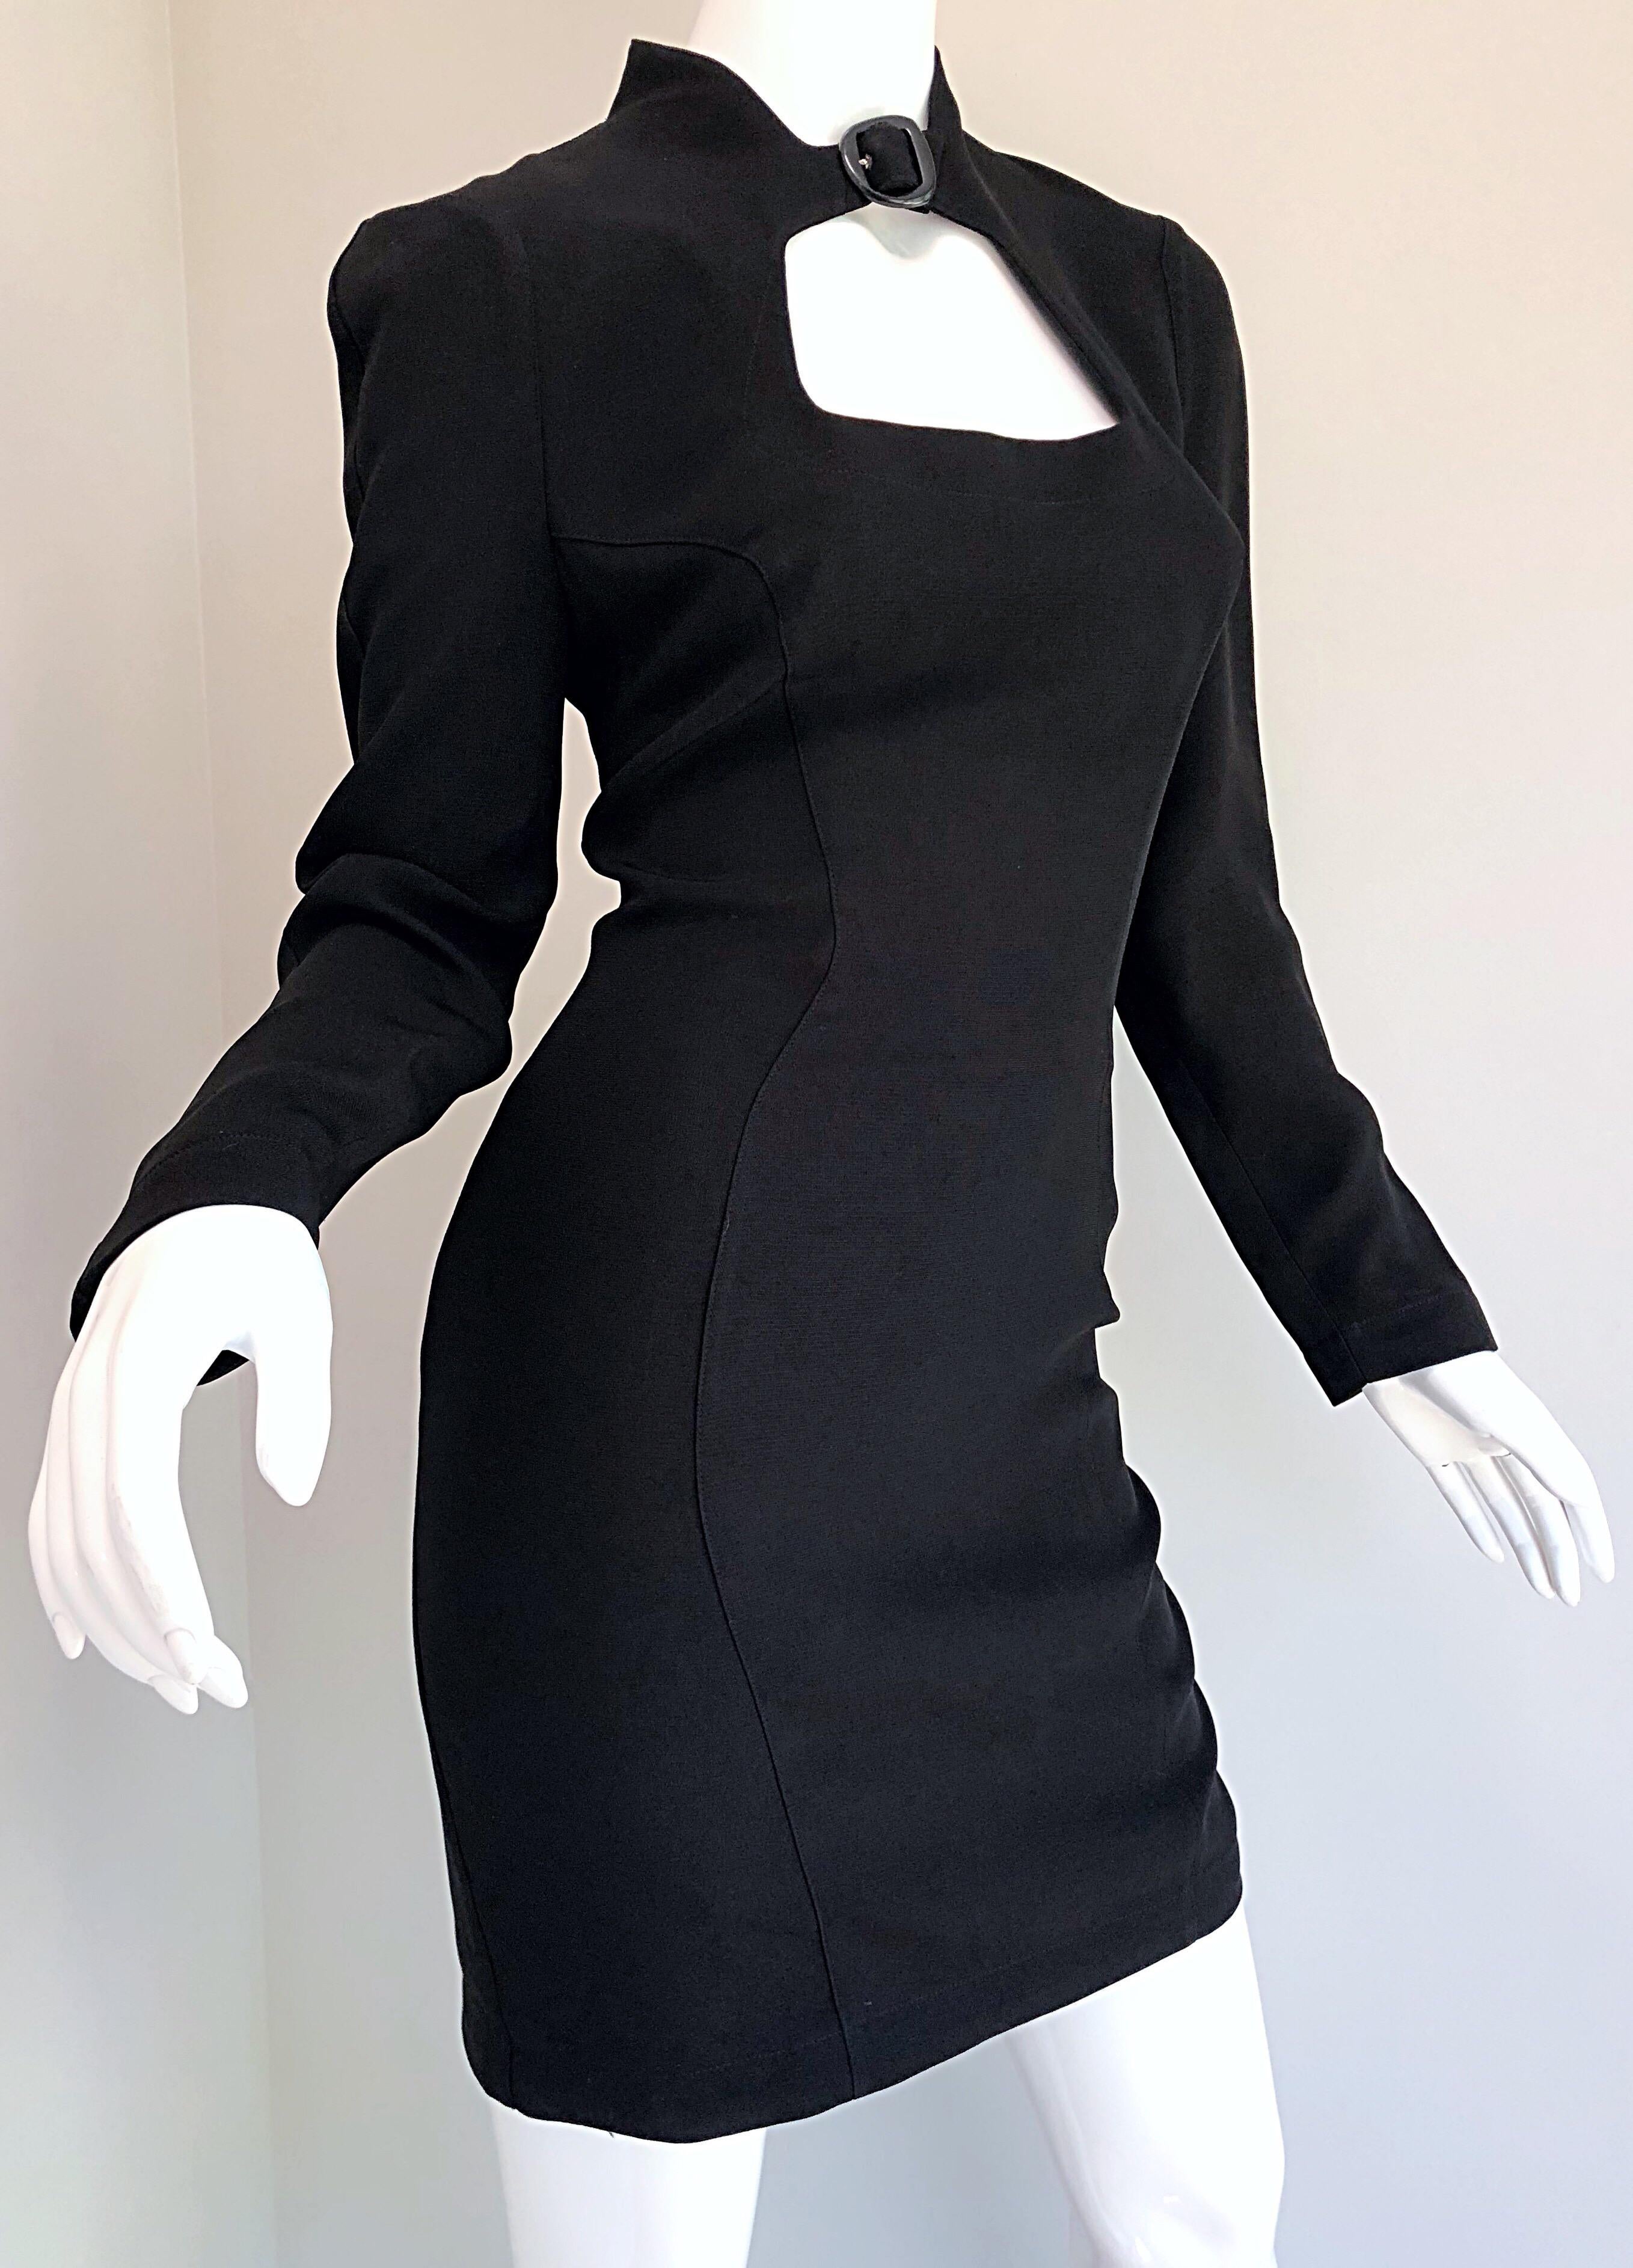 Iconic Vintage Thierry Mugler 80s Bondage Inspired Cut - Out Black 1980s Dress For Sale 2